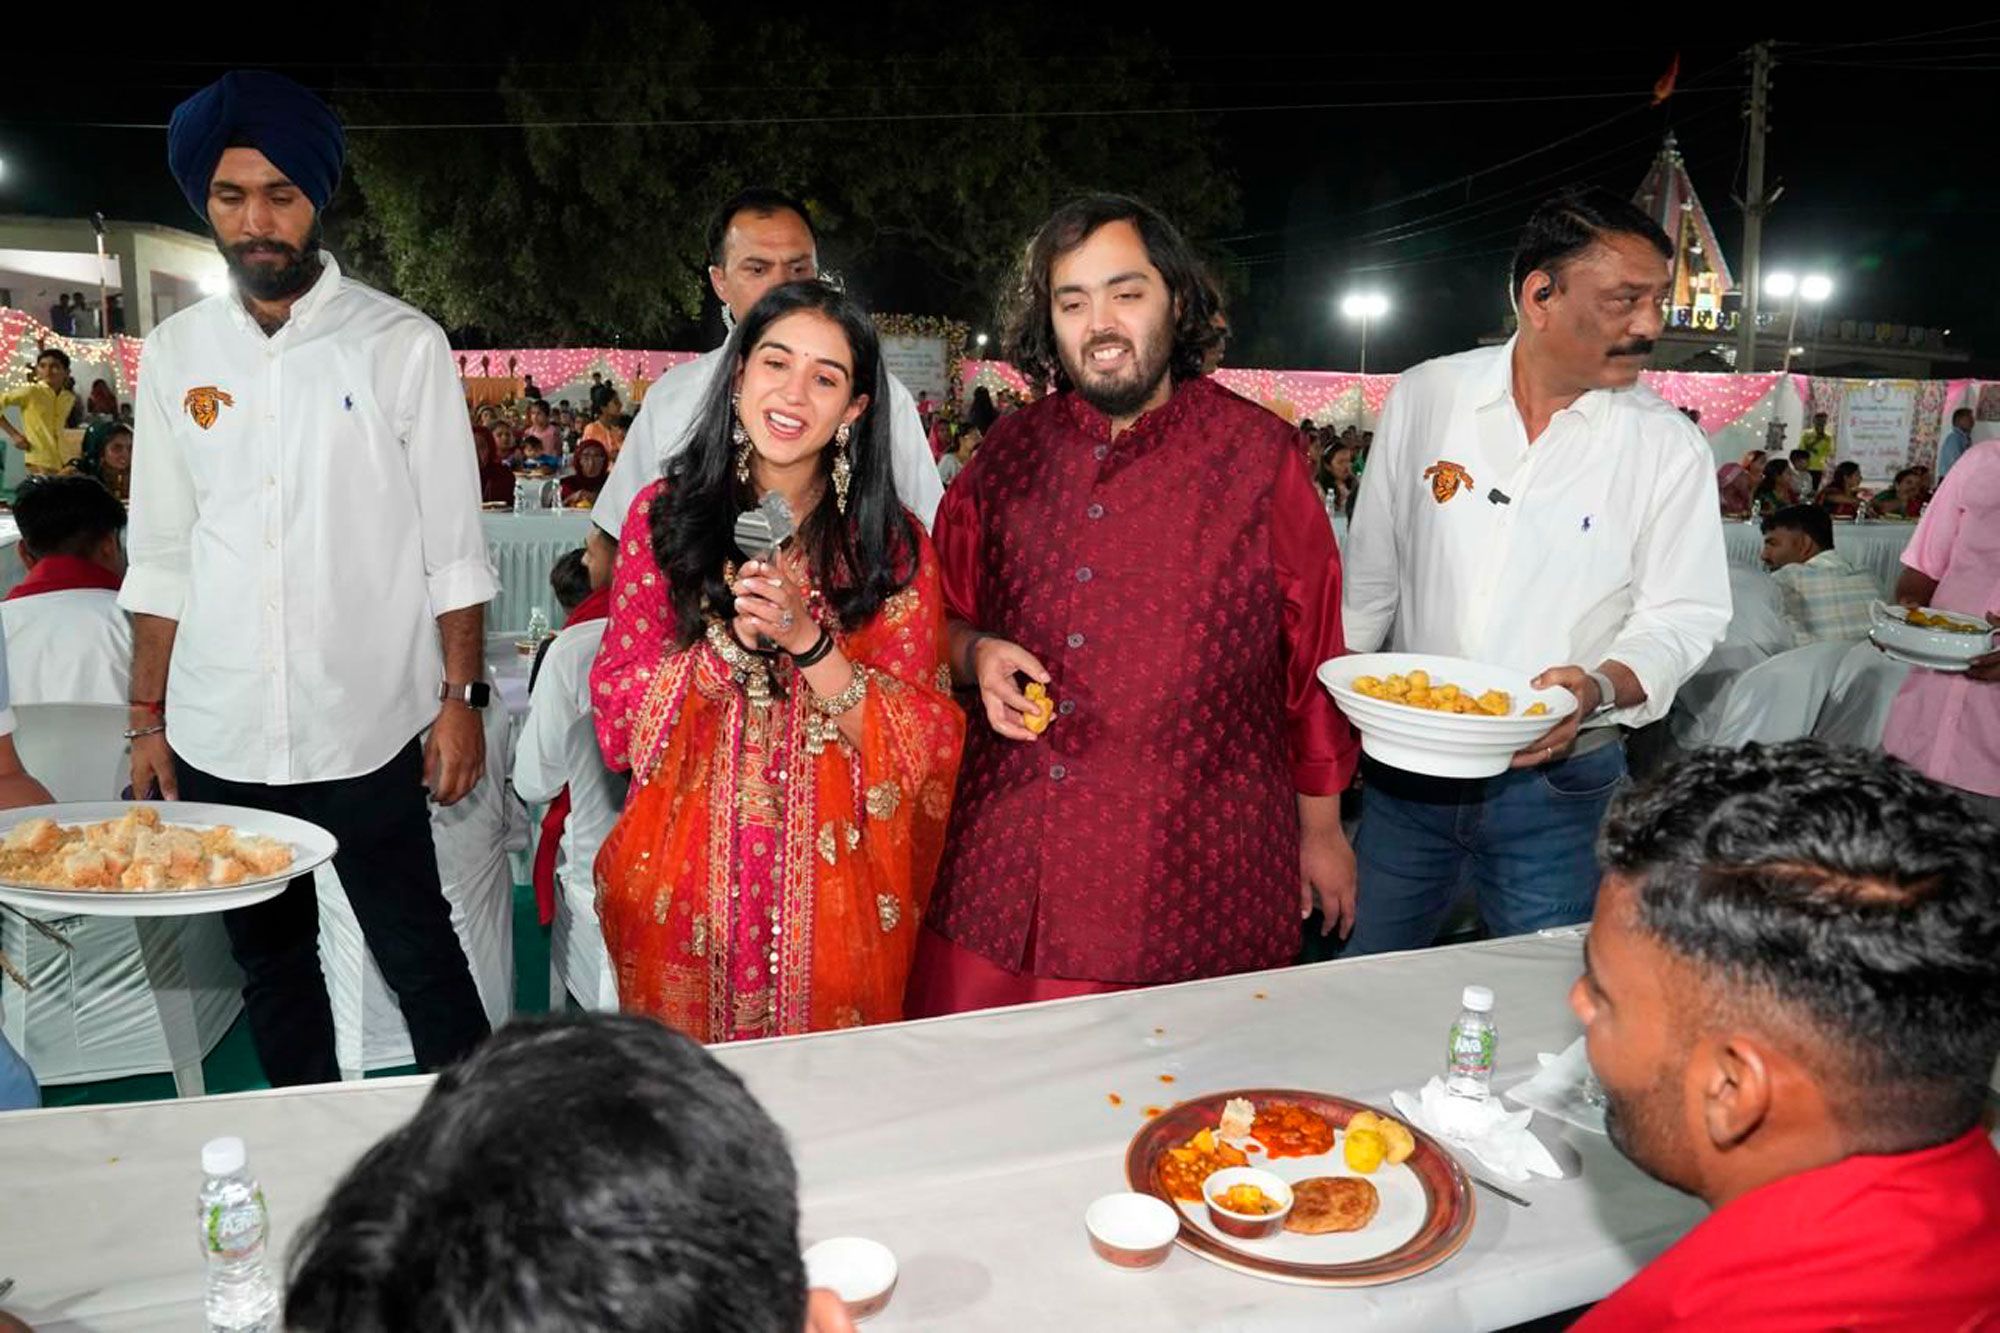 Billionaire Mukesh Ambani's son Anant and his fiancée Radhika Merchant at a pre-wedding event that served food to more than 50,000 villagers near Jamnagar, India.